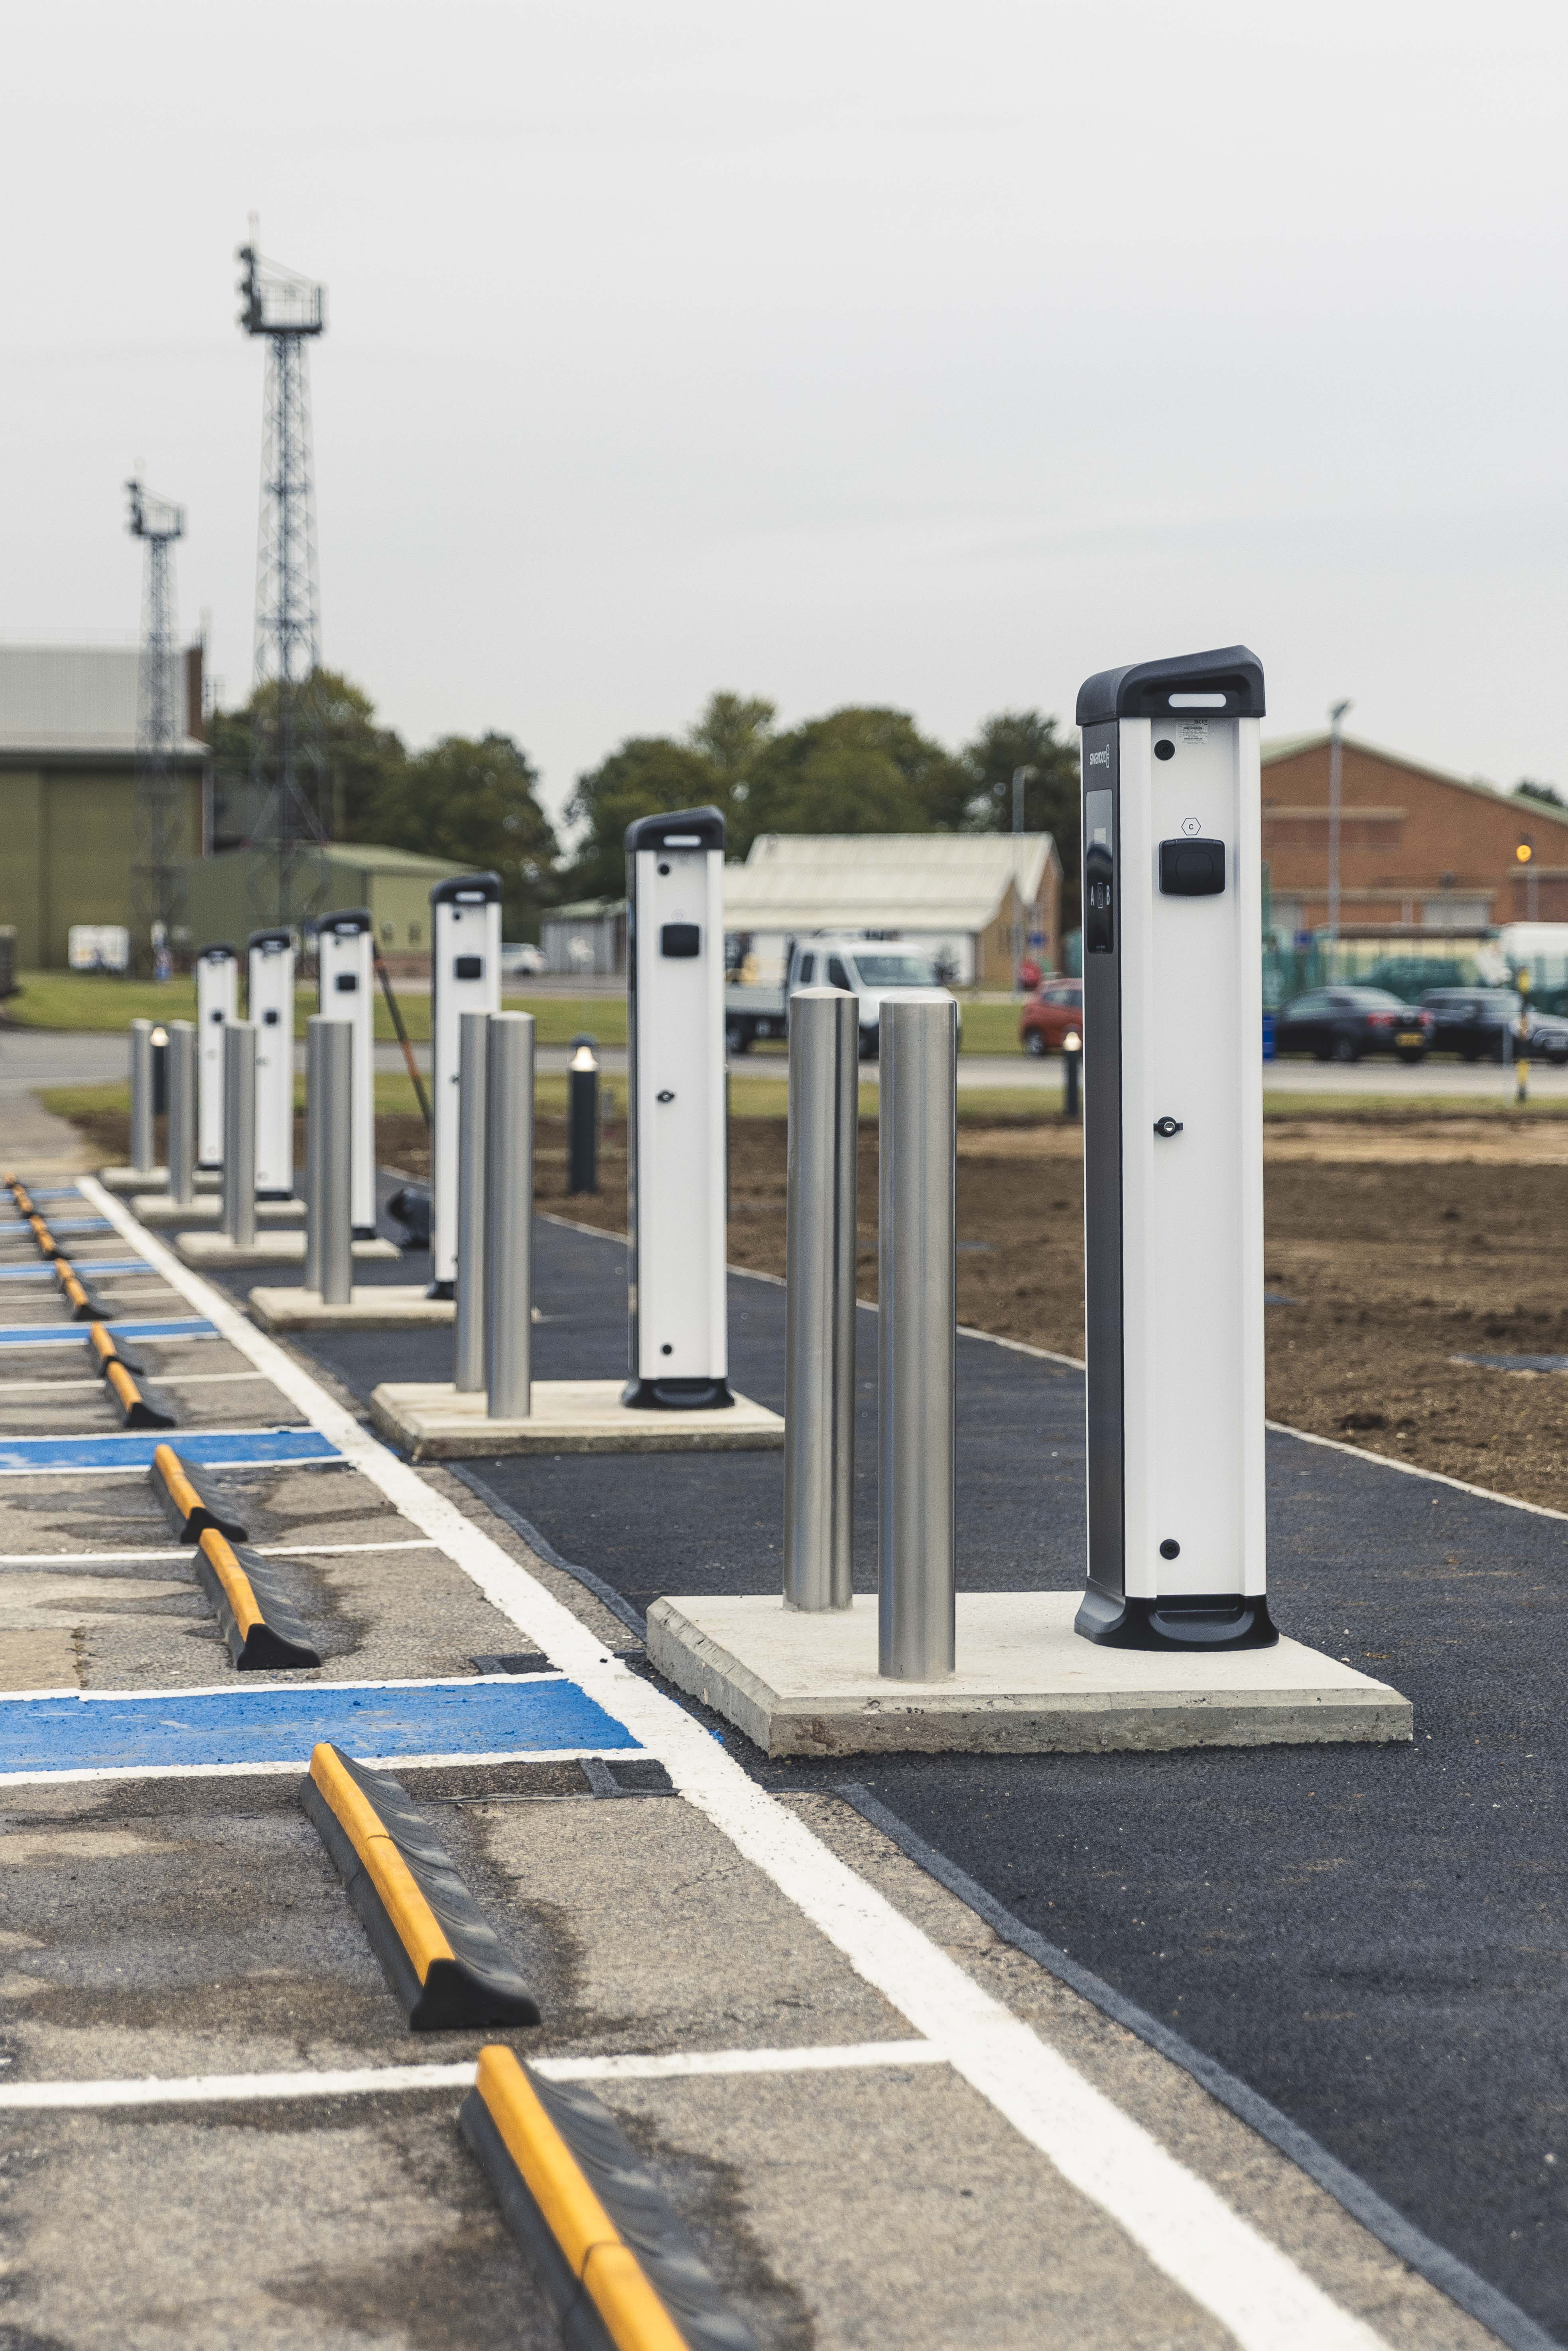 The new electric vehicle charging ports for military vehicles at RAF Wittering